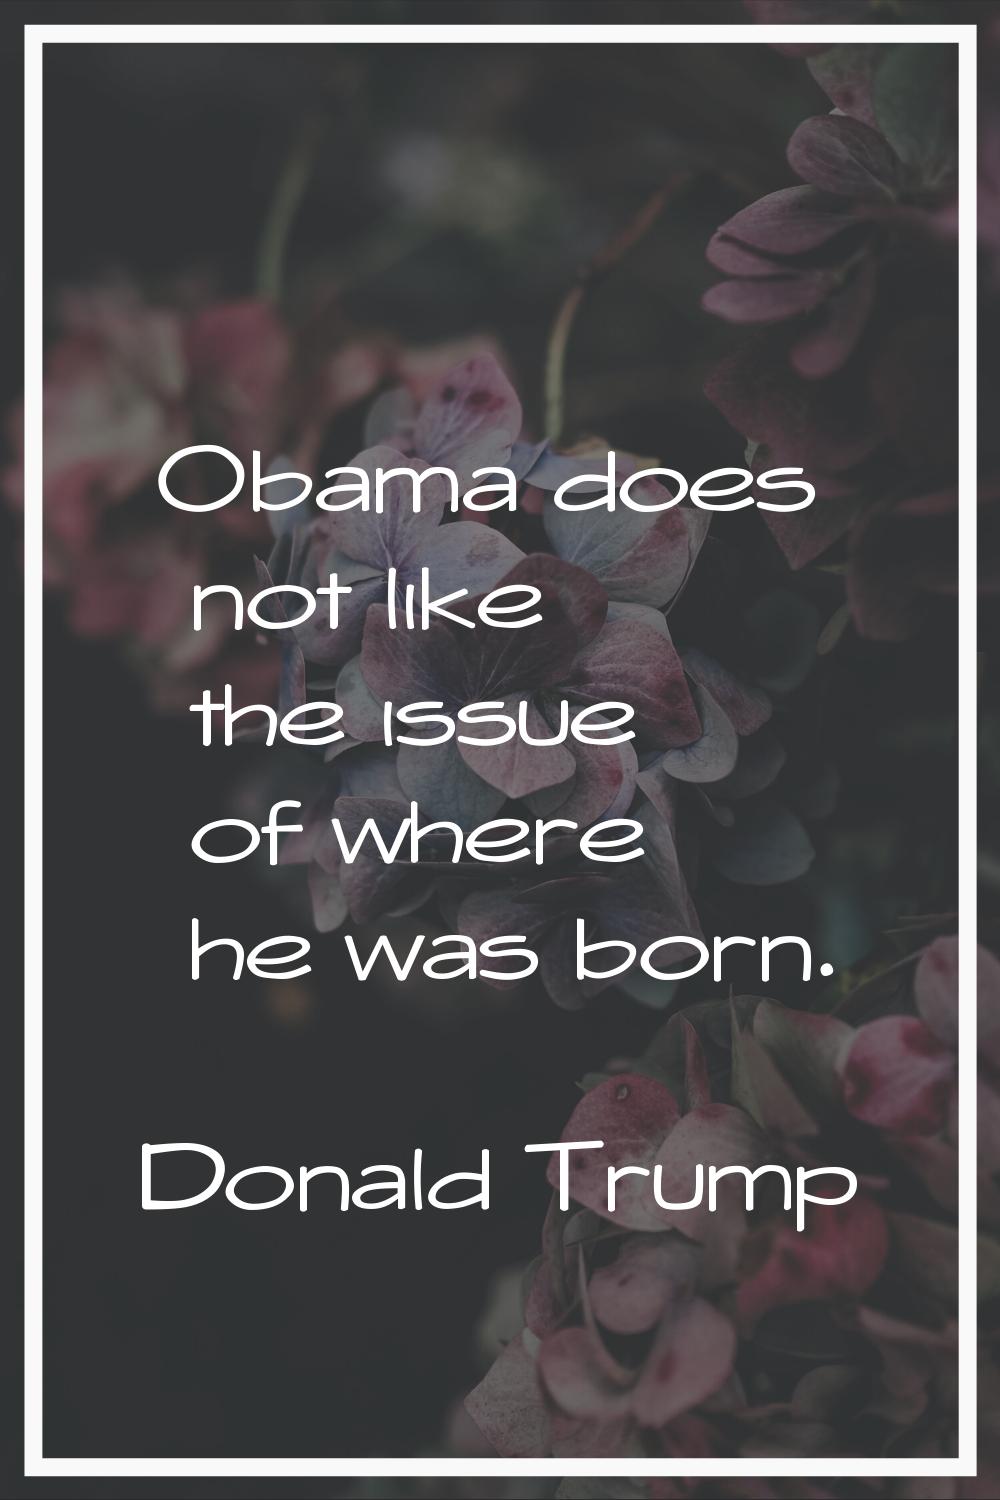 Obama does not like the issue of where he was born.